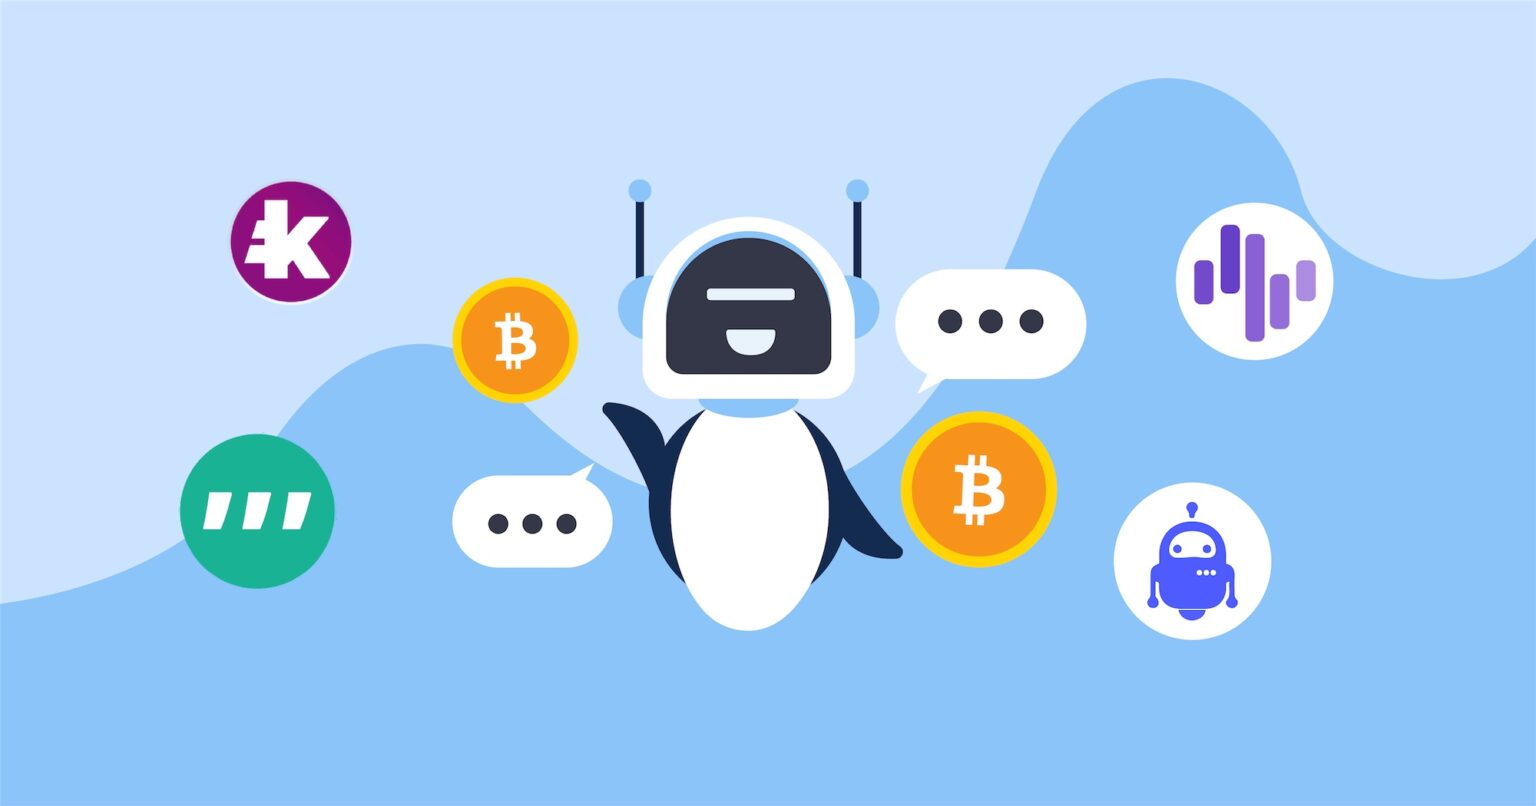 Automatic trading bots are changing the way that cryptocurrency investors make money. Discover KuCoin, one of the best new bots on the market.